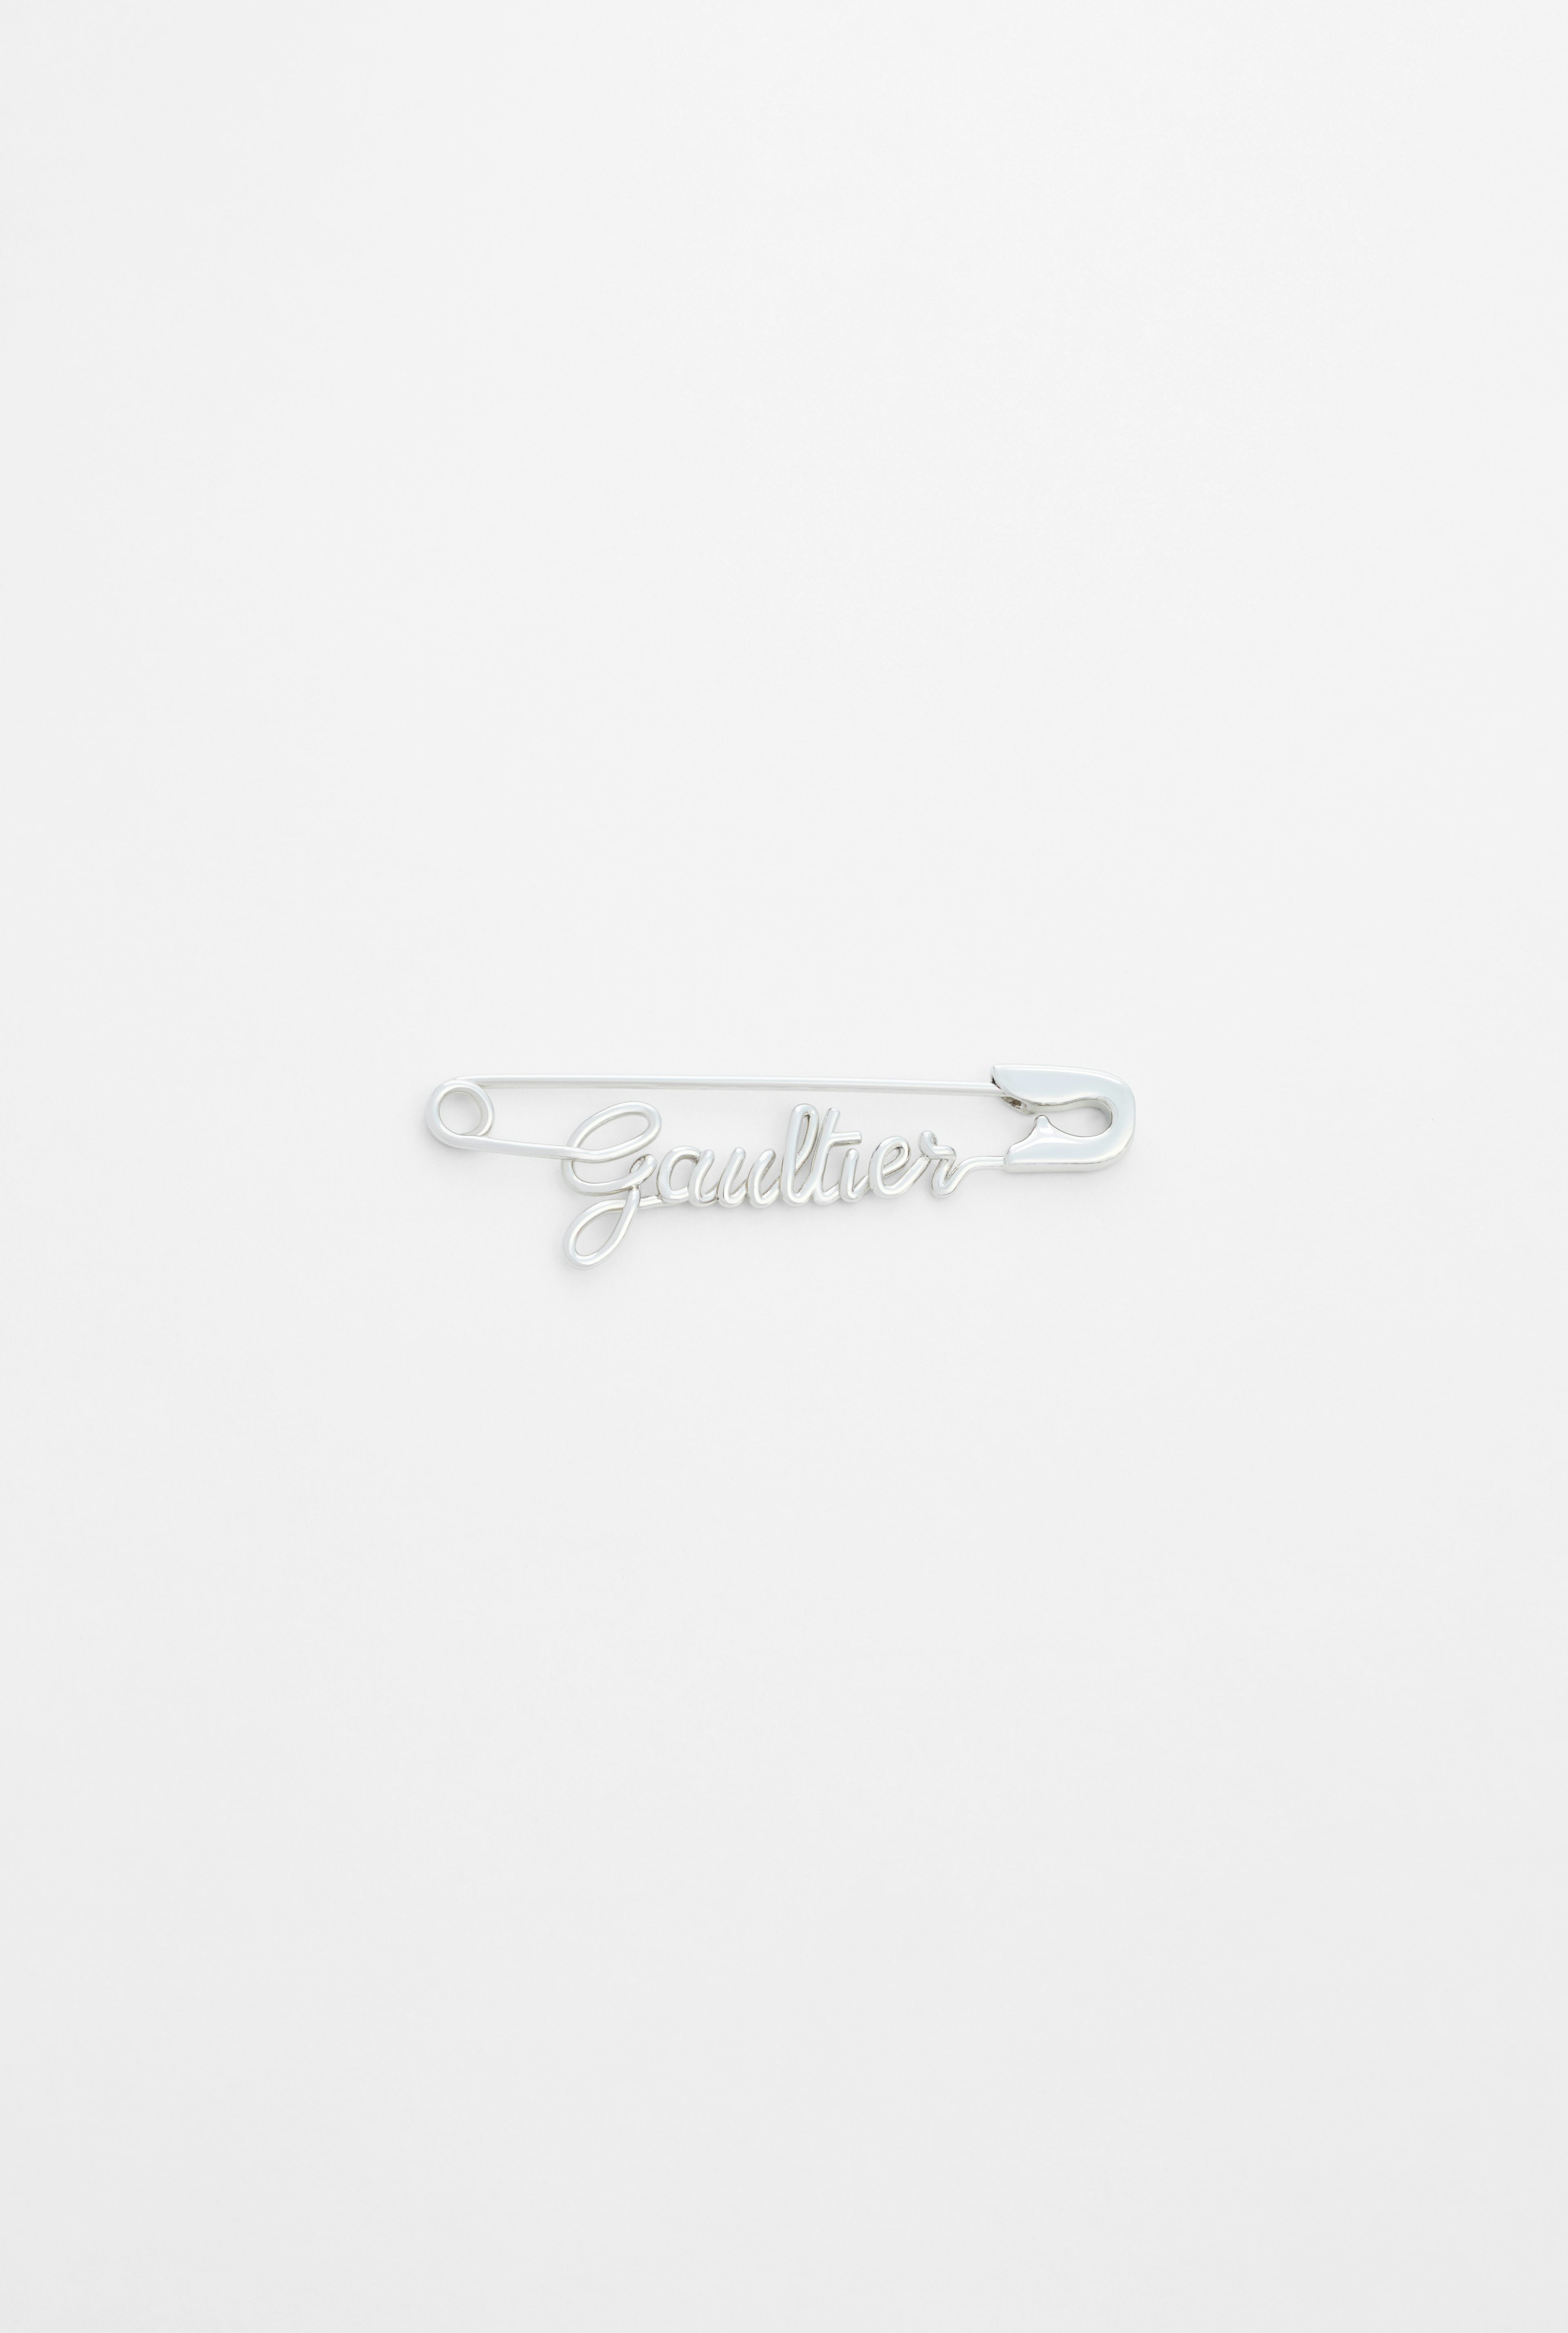 The Gaultier safety pin earring 